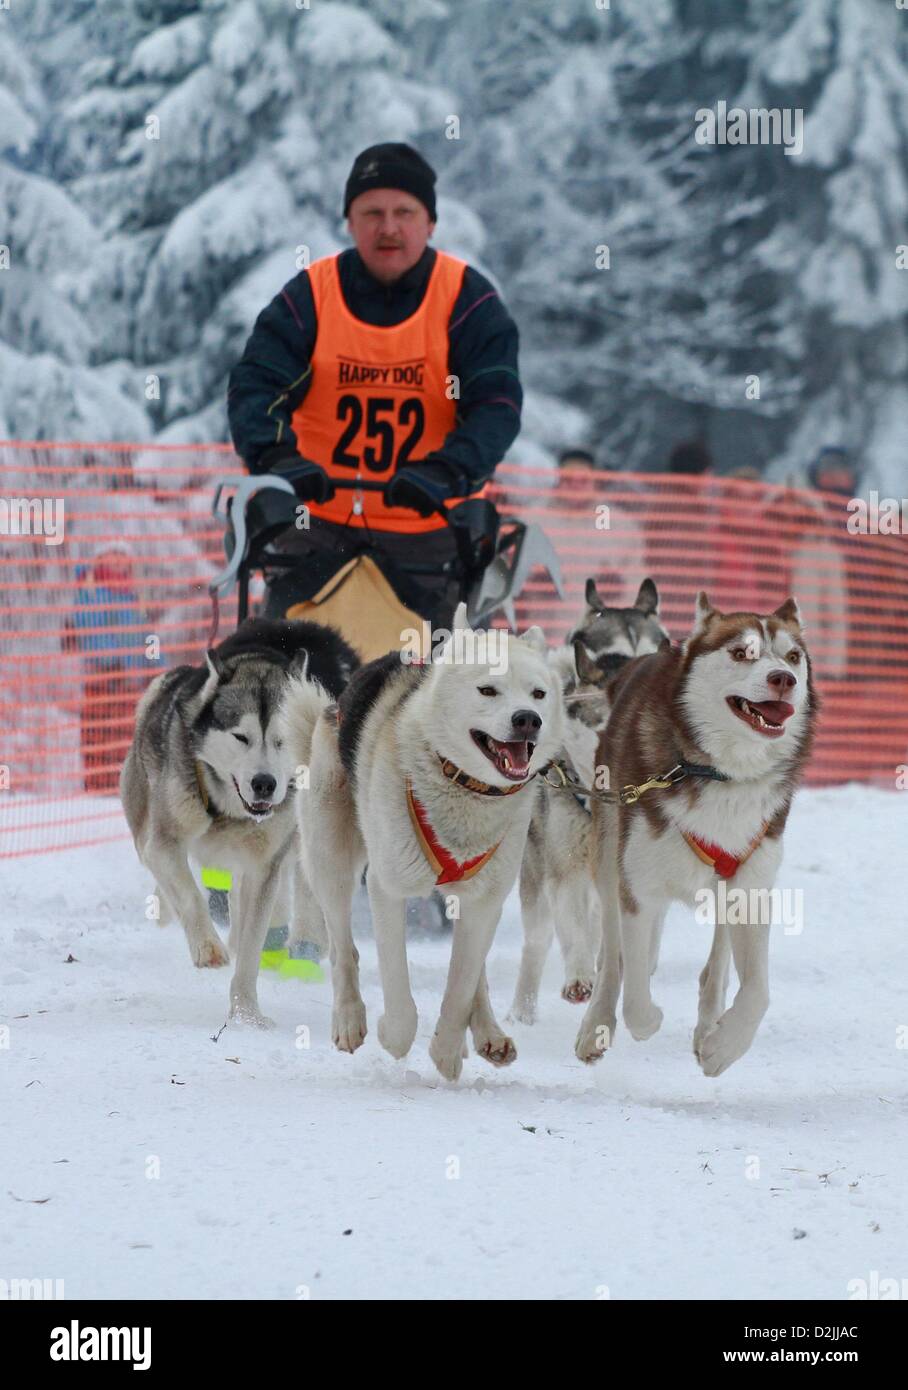 Benneckenstein, Germany. 26th January 2013. Erhard Feikert and his sled dogs compete in the sled dog race in Benneckenstein, Germany, 26 January 2013. 35 participants have registered for the sled dog race. Photo: MATTHIAS BEIN/ Alamy Live News Stock Photo